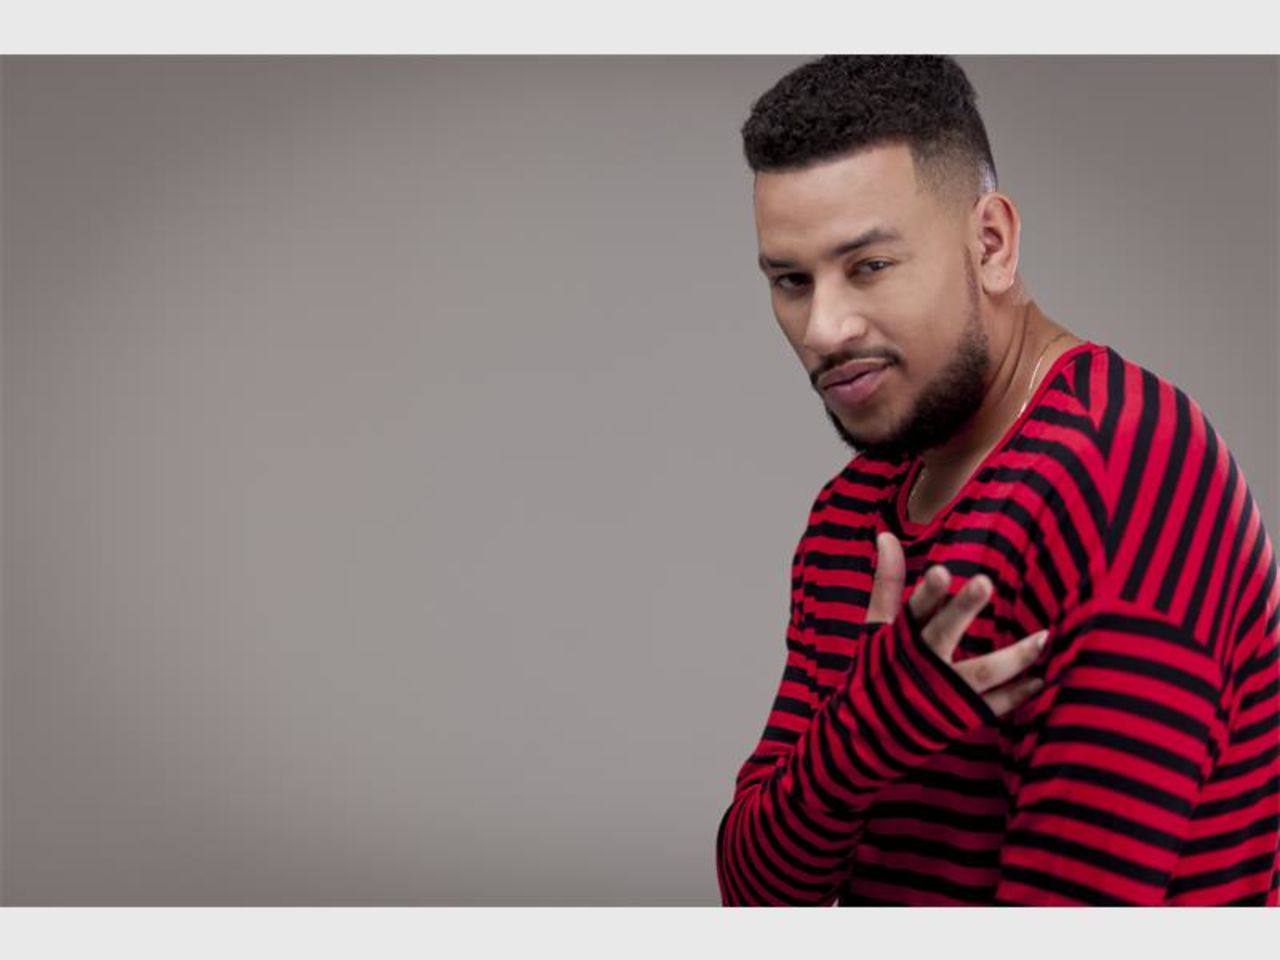 Kierman Jarryd Forbes popularly known as AKA, is a South African hiphop recording artist and record producer.